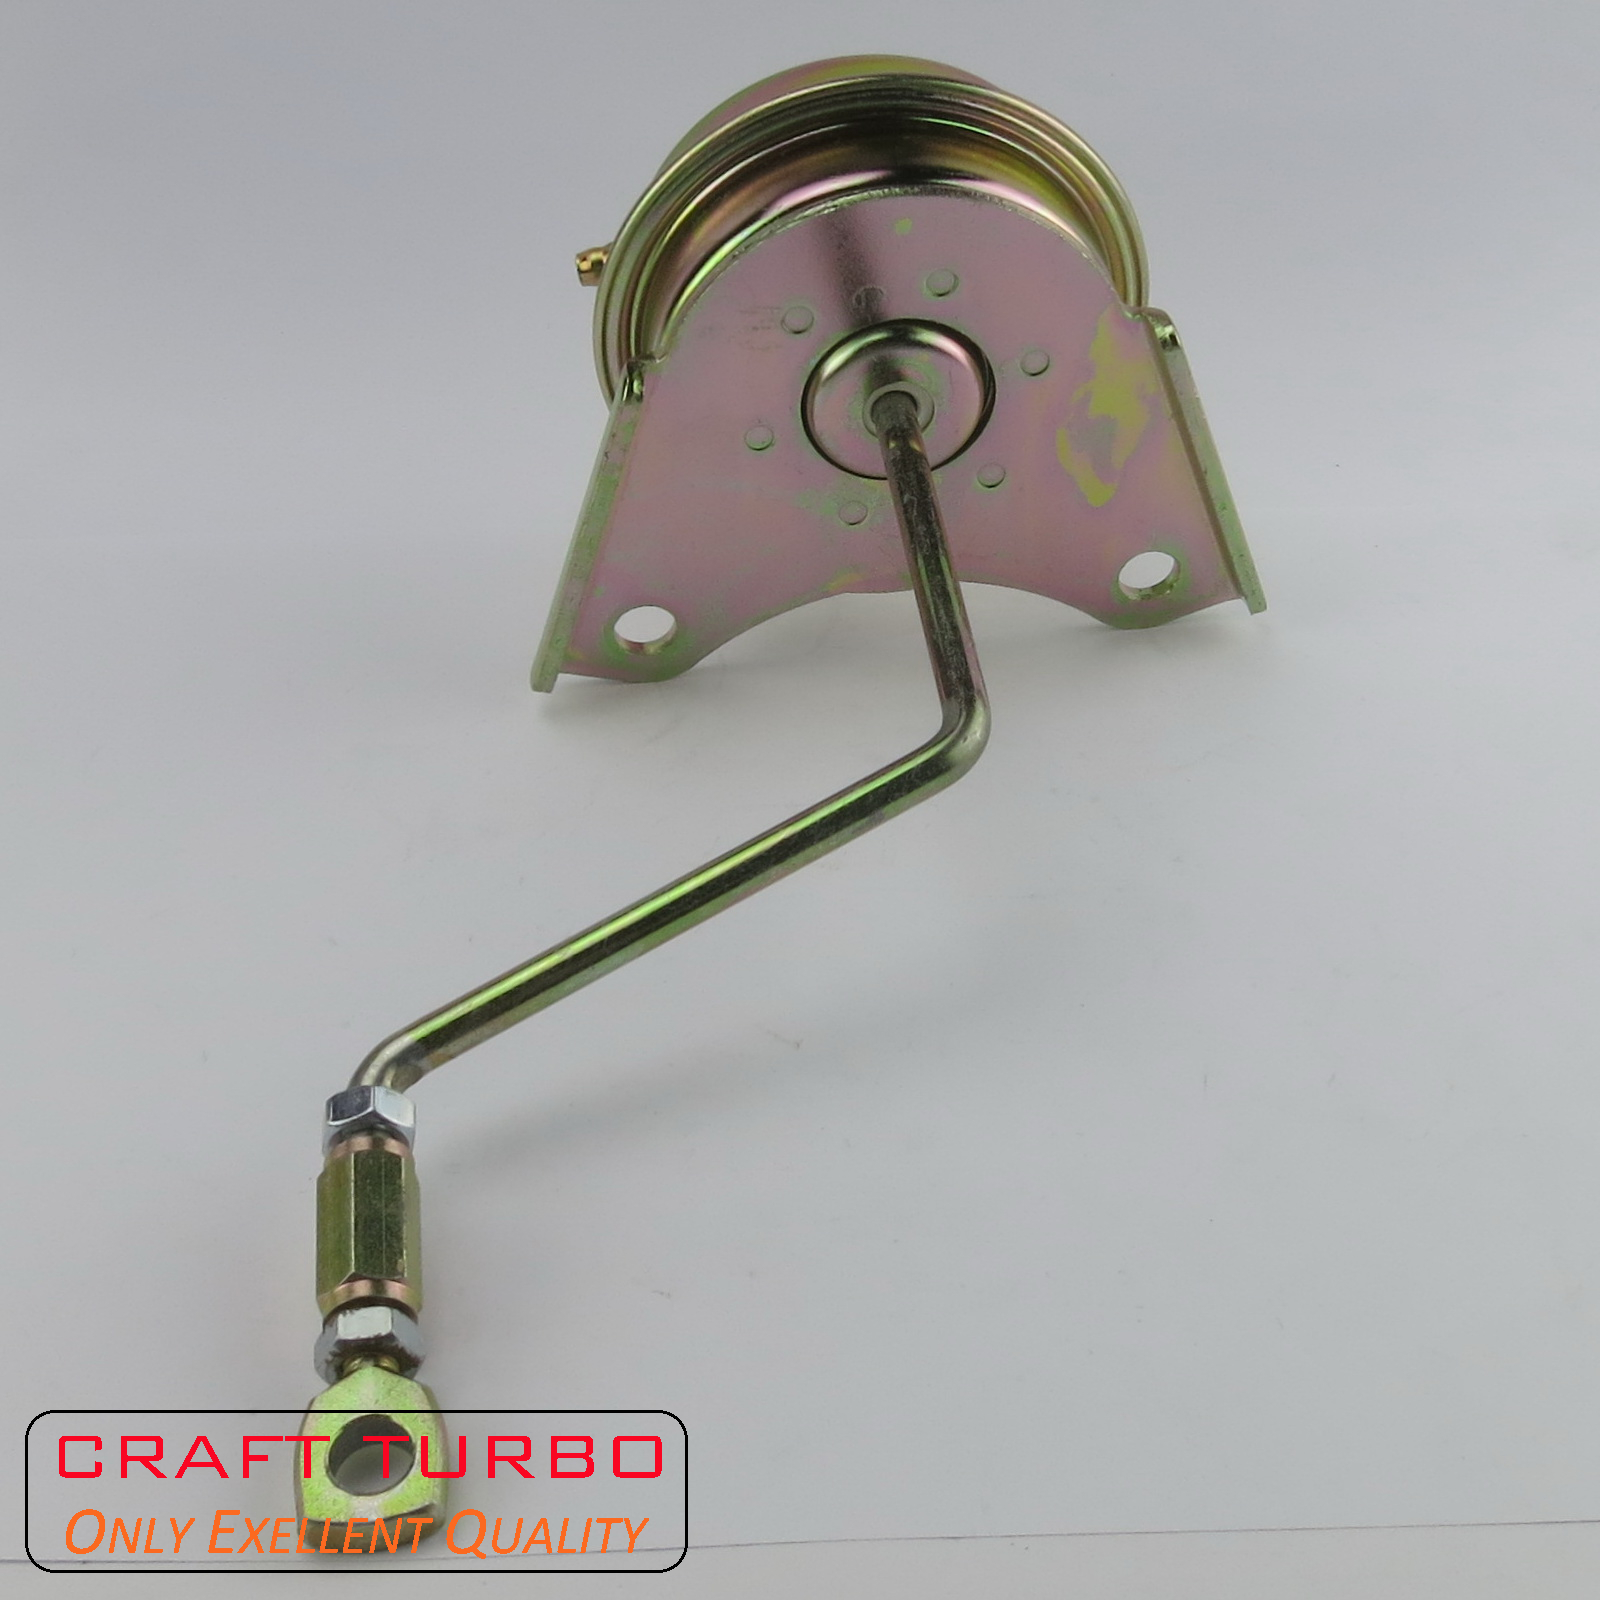 TF035 Actuator for Turbochargers 